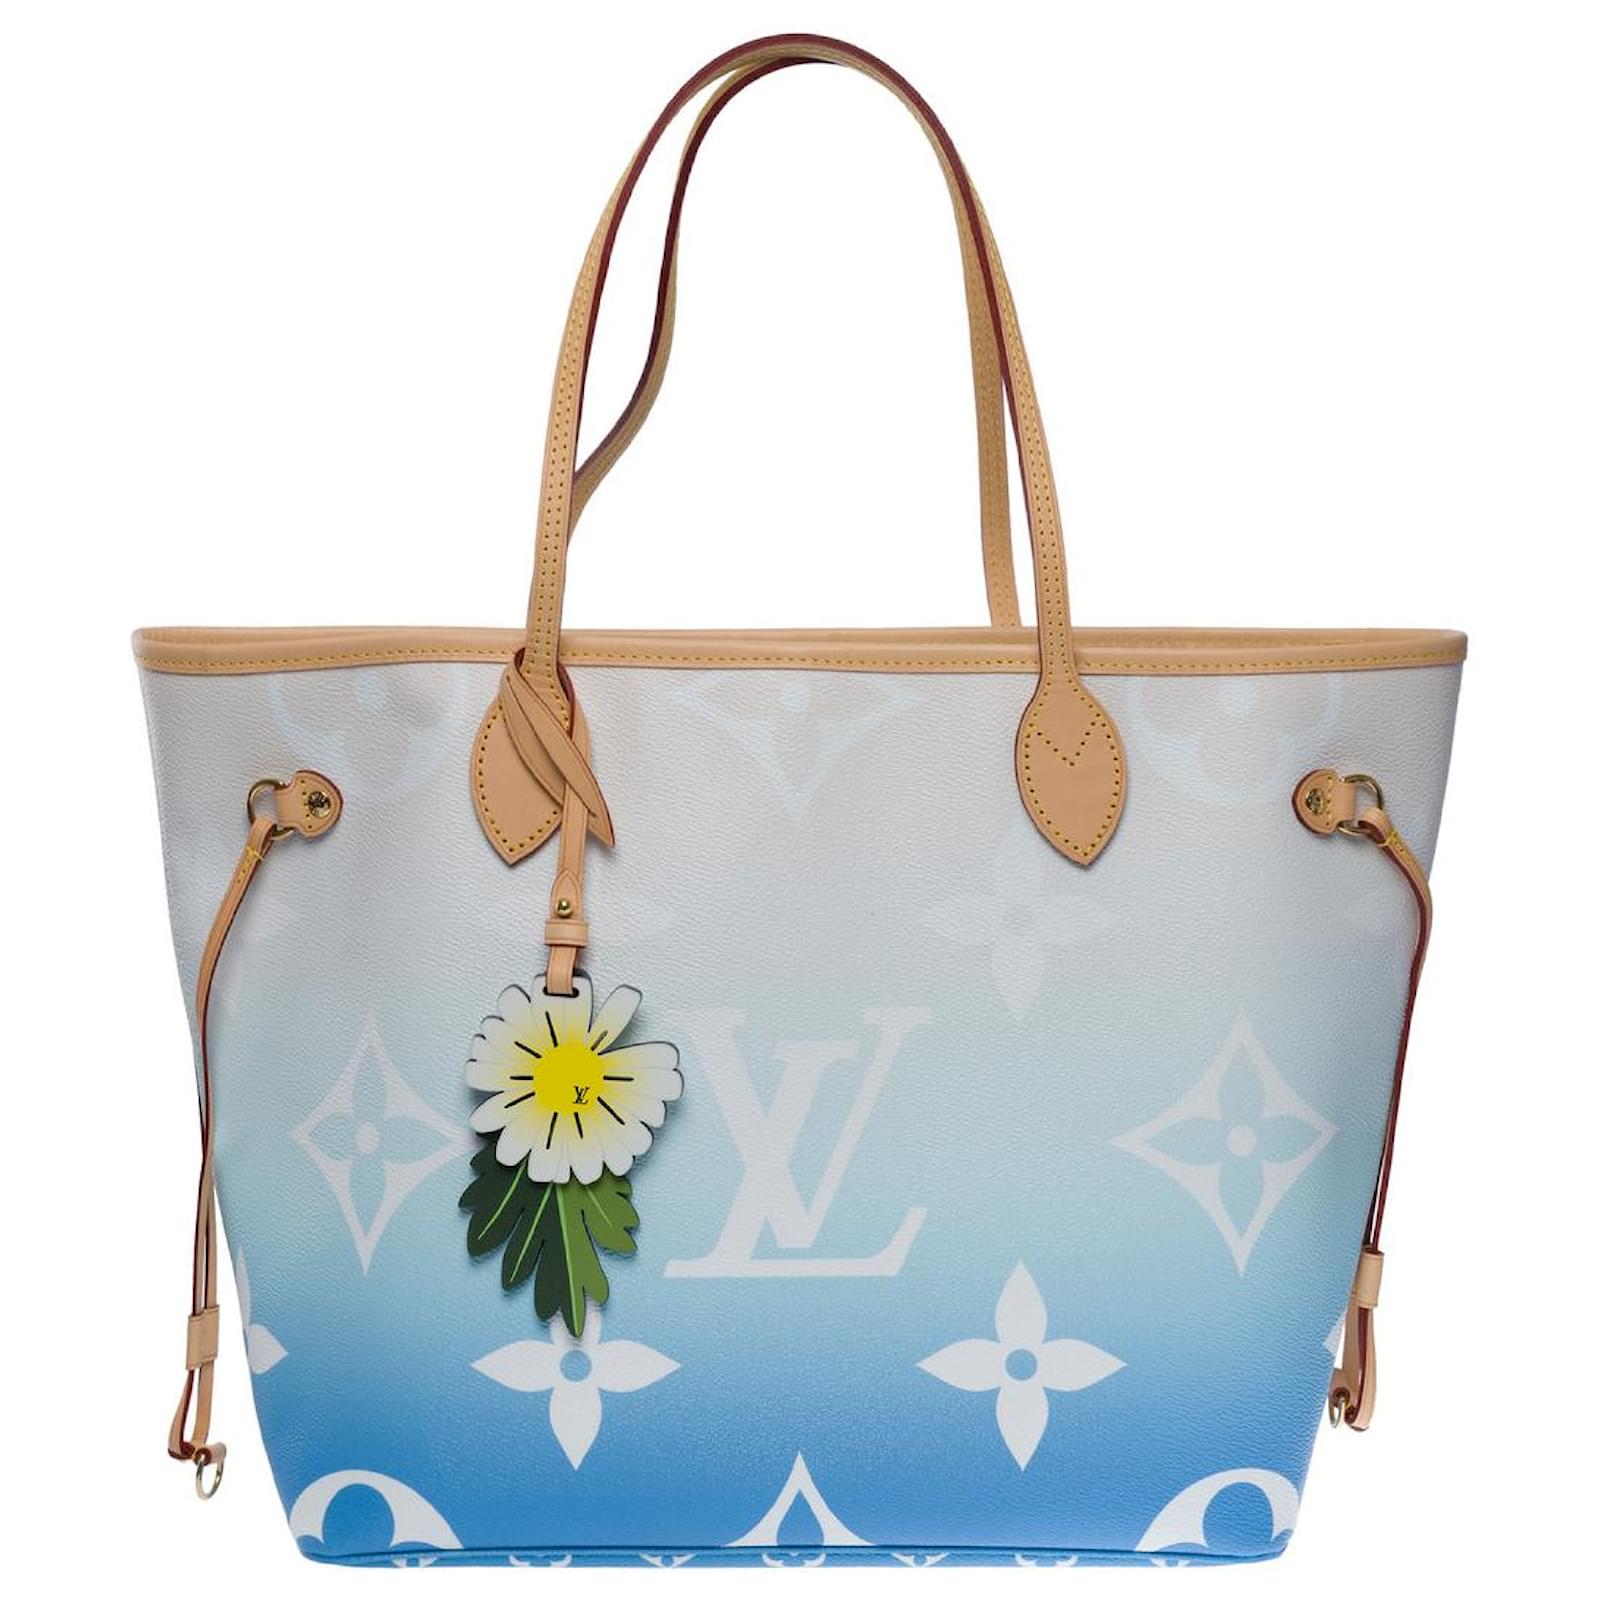 Louis Vuitton neverfull mm by the pool tote bag in blue and white